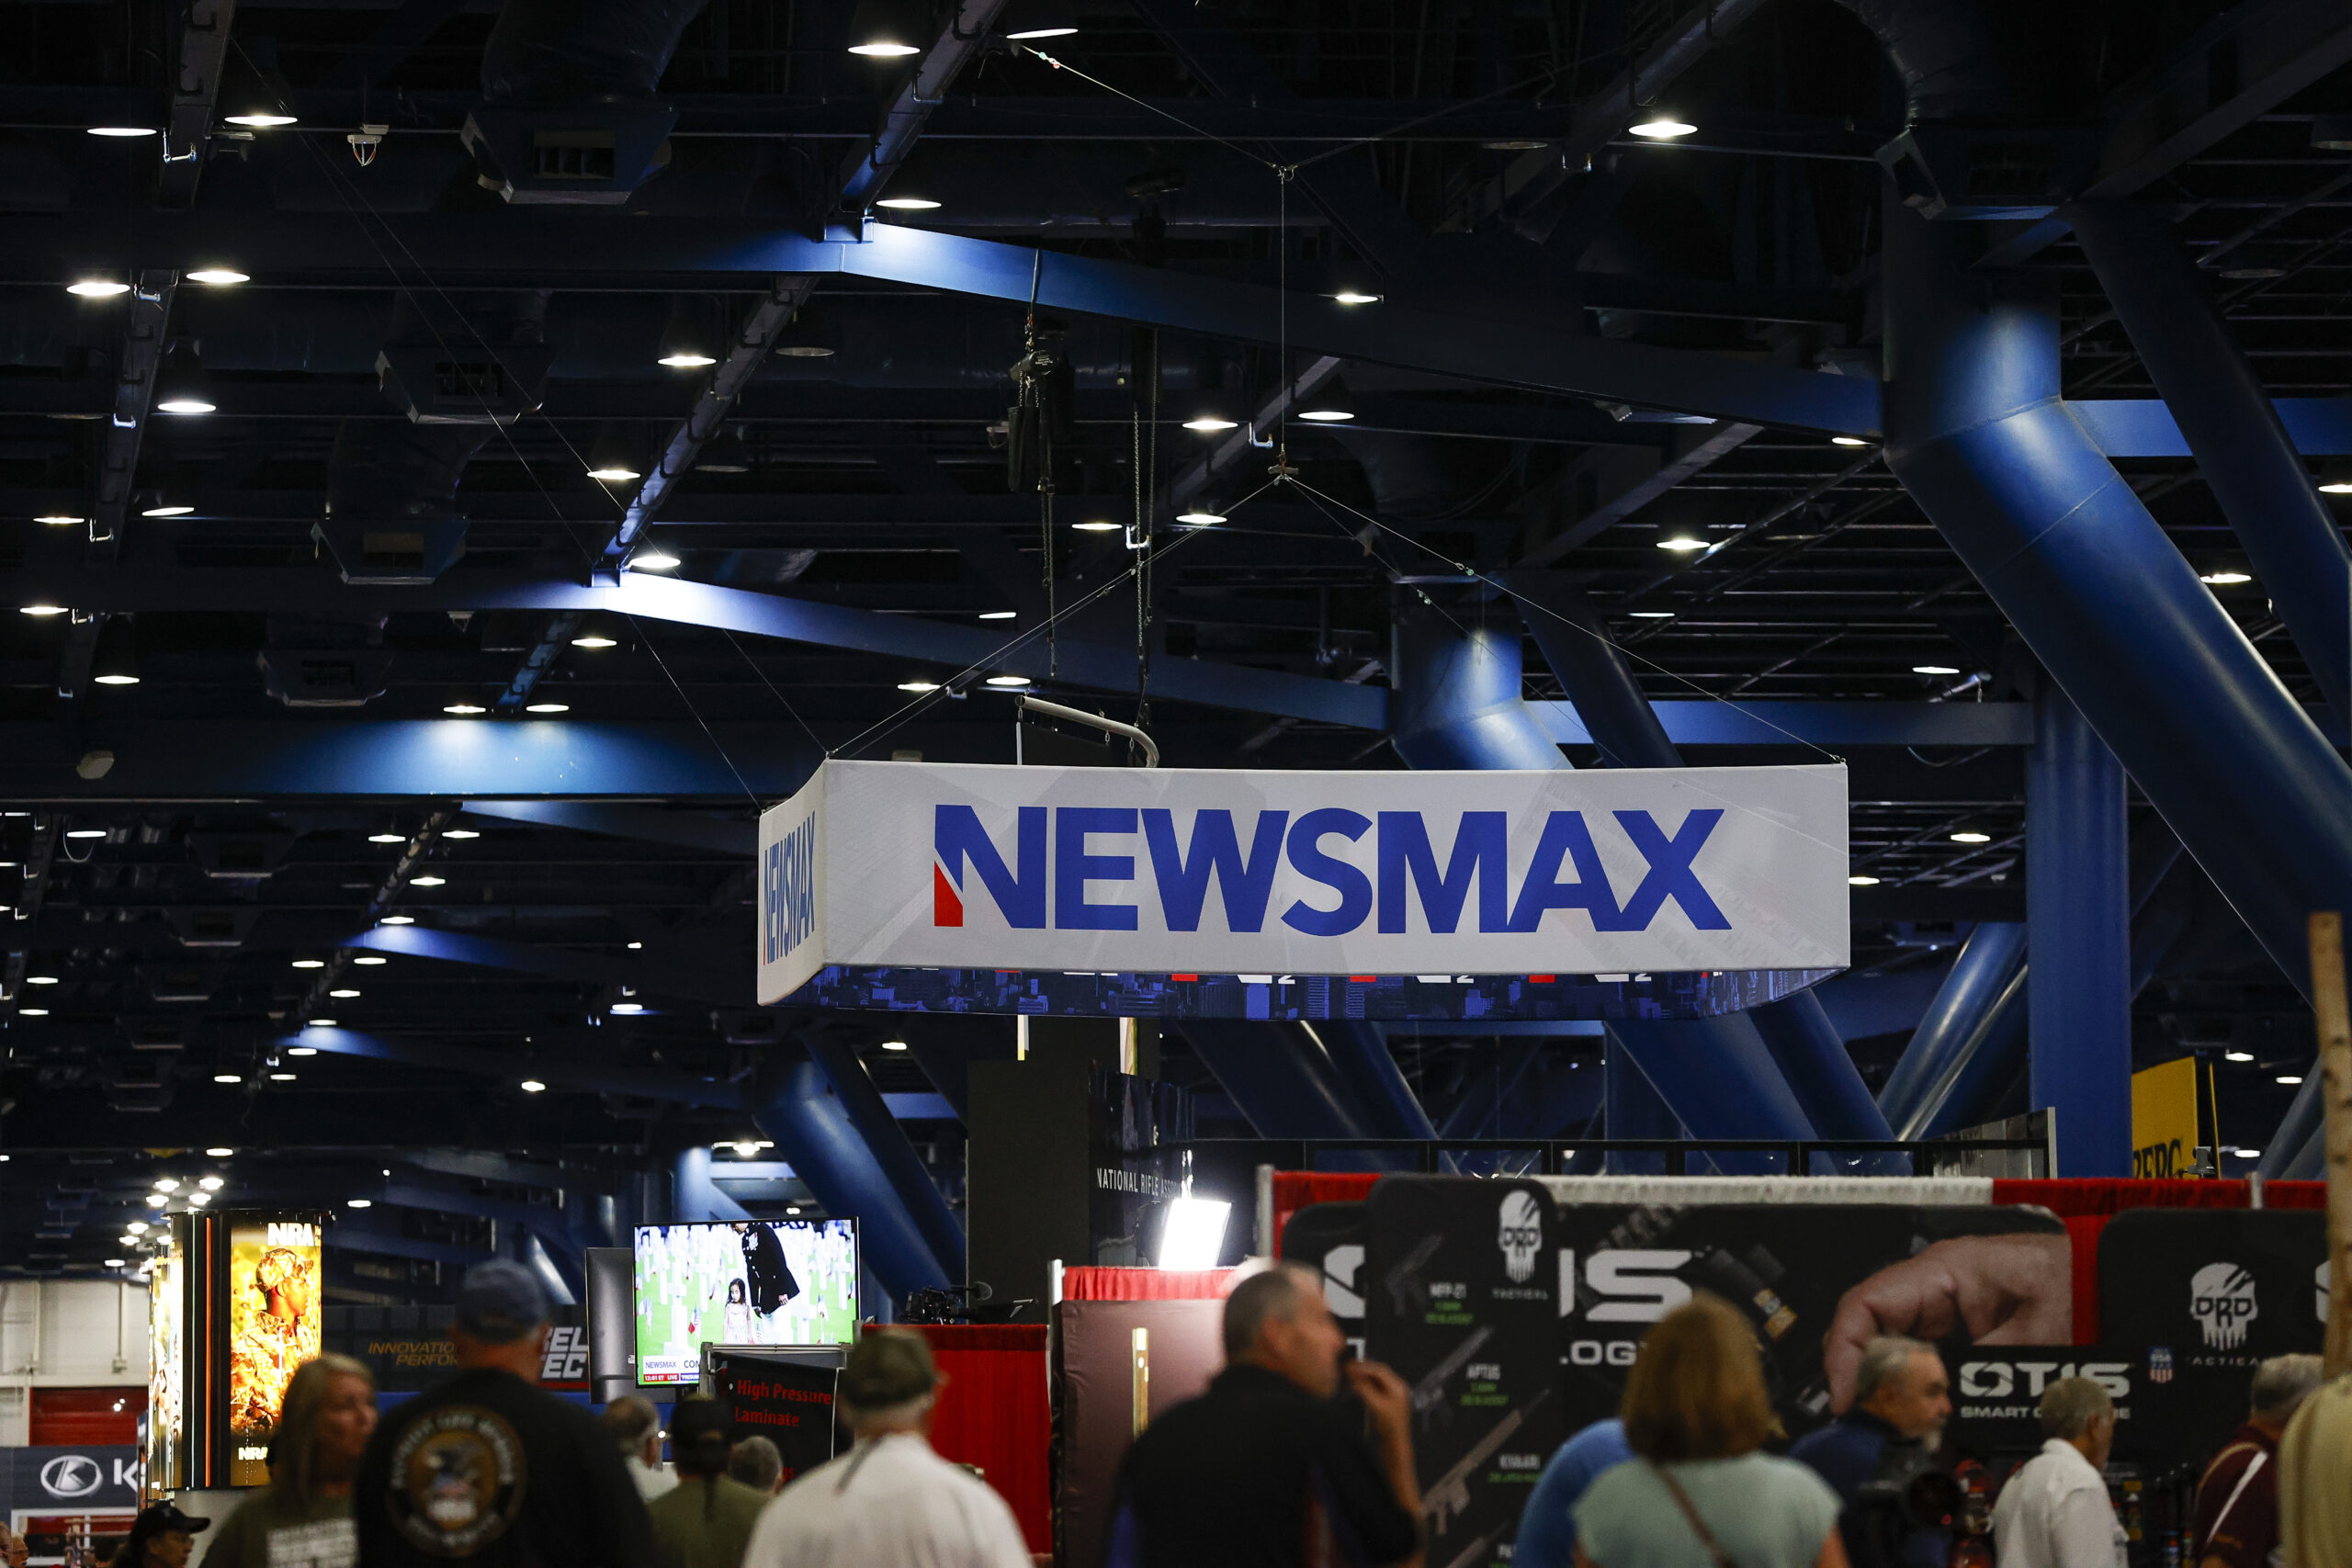 View of the Newsmax logo during NRA event